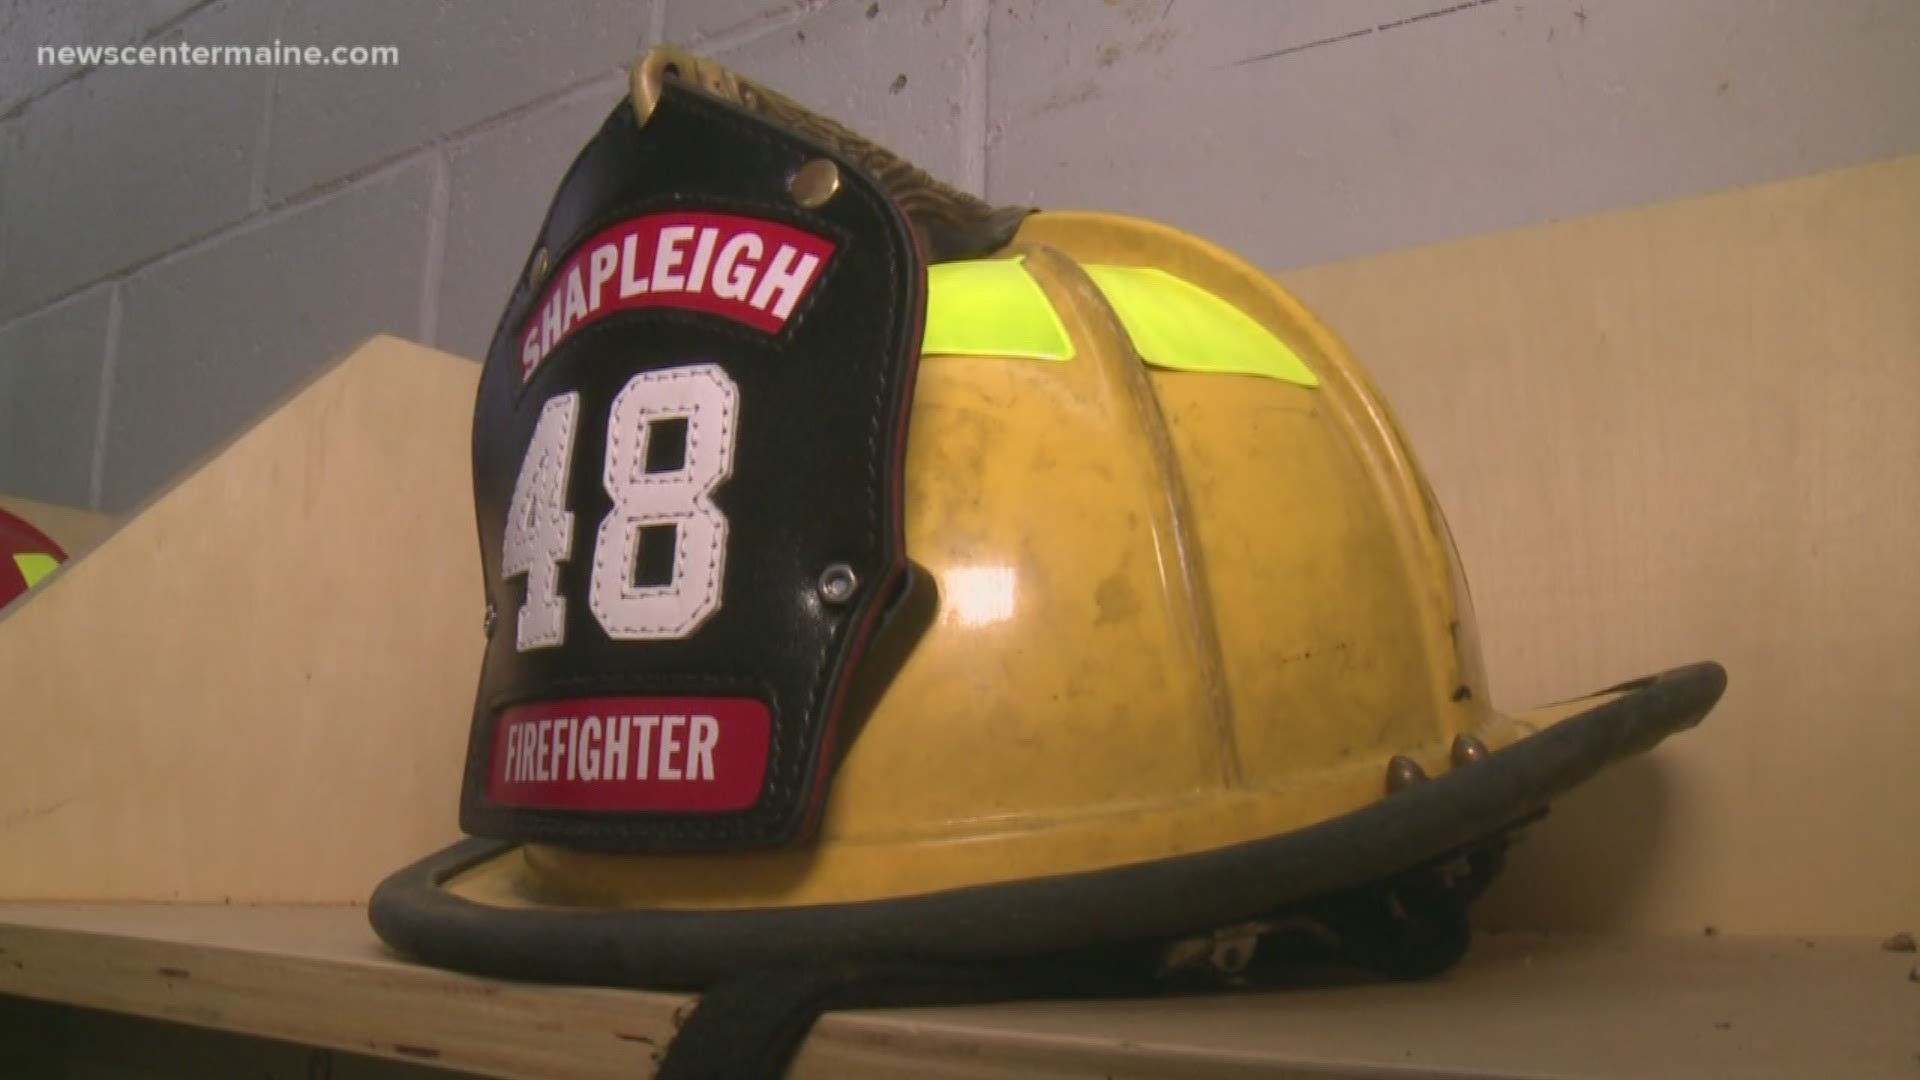 "I'm afraid someone's going to die." Shapleigh firefighters concerned for their safety under new chief